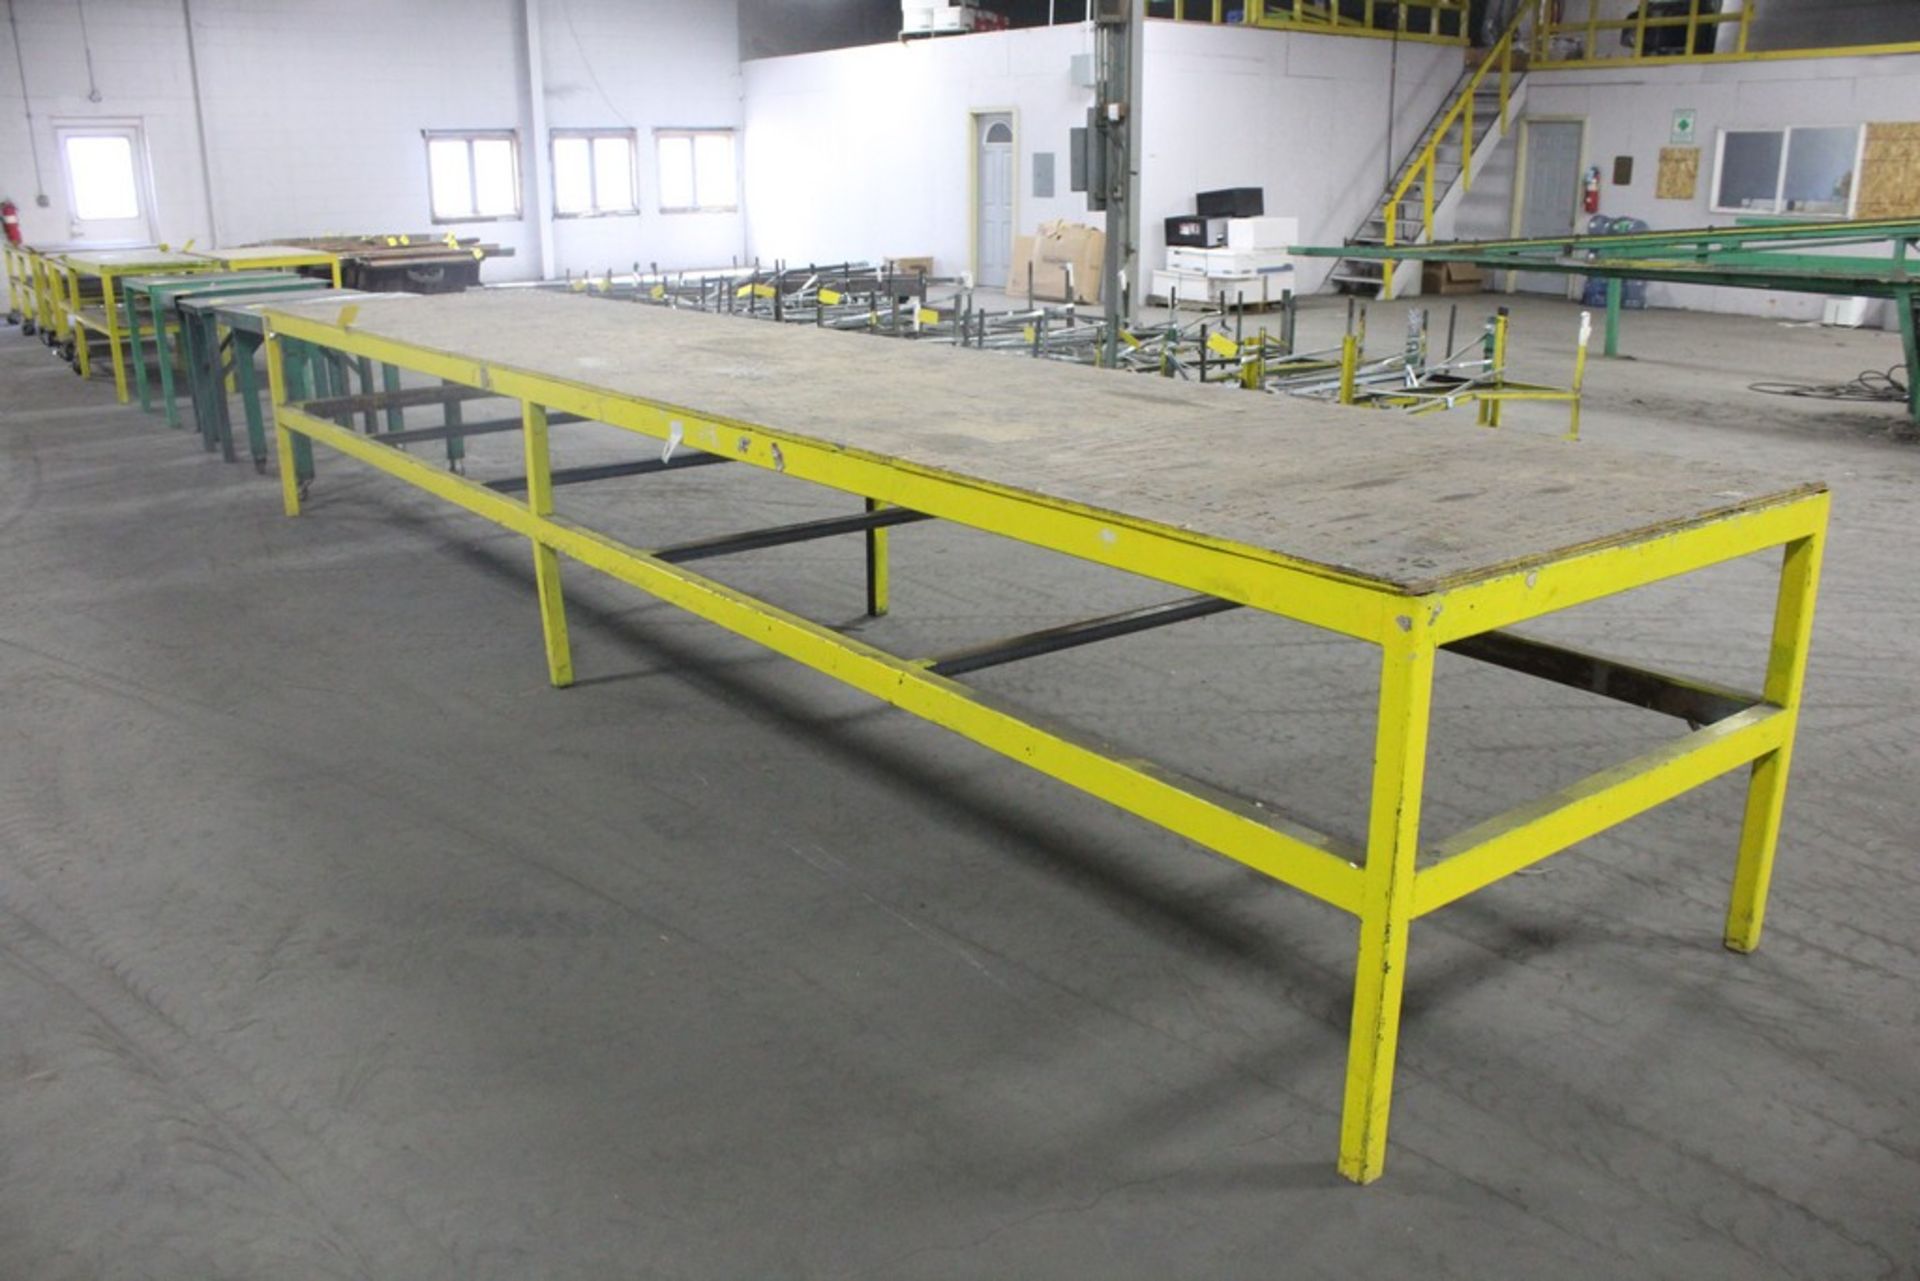 Heavy Duty Work Table - 240" x 48"" x 37"H (Yellow) - Image 2 of 2